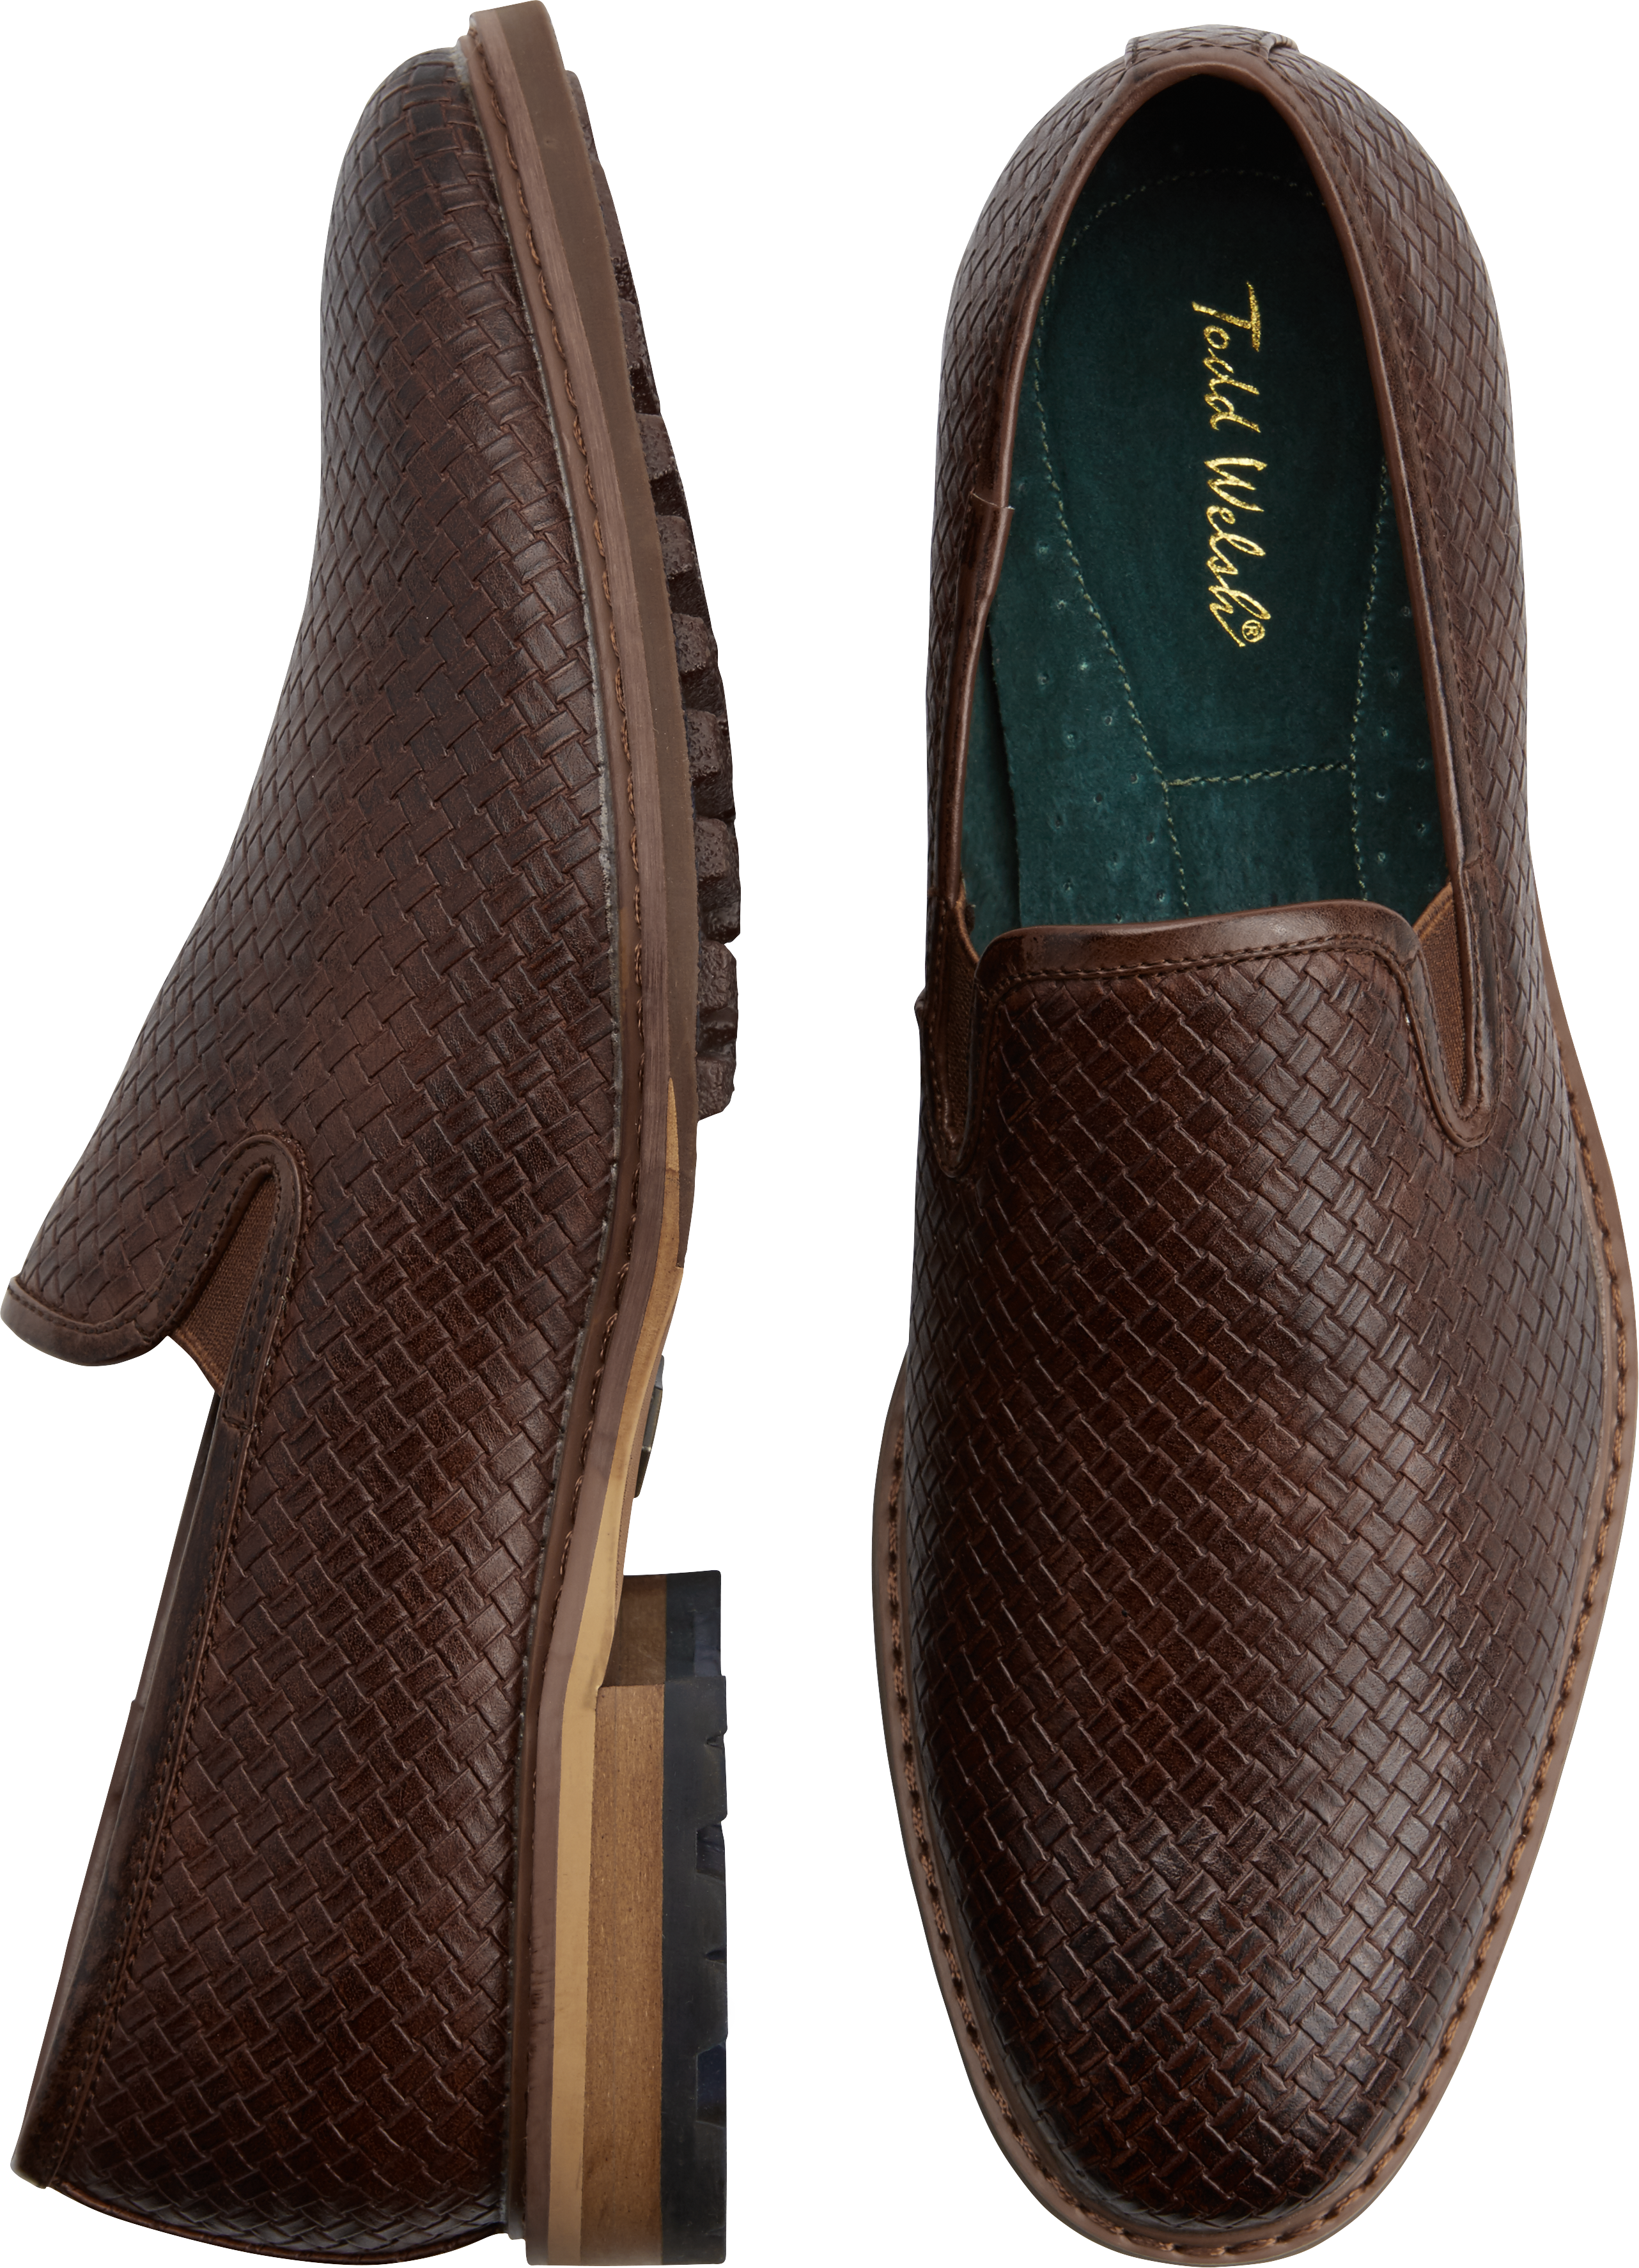 todd welsh slip on shoes